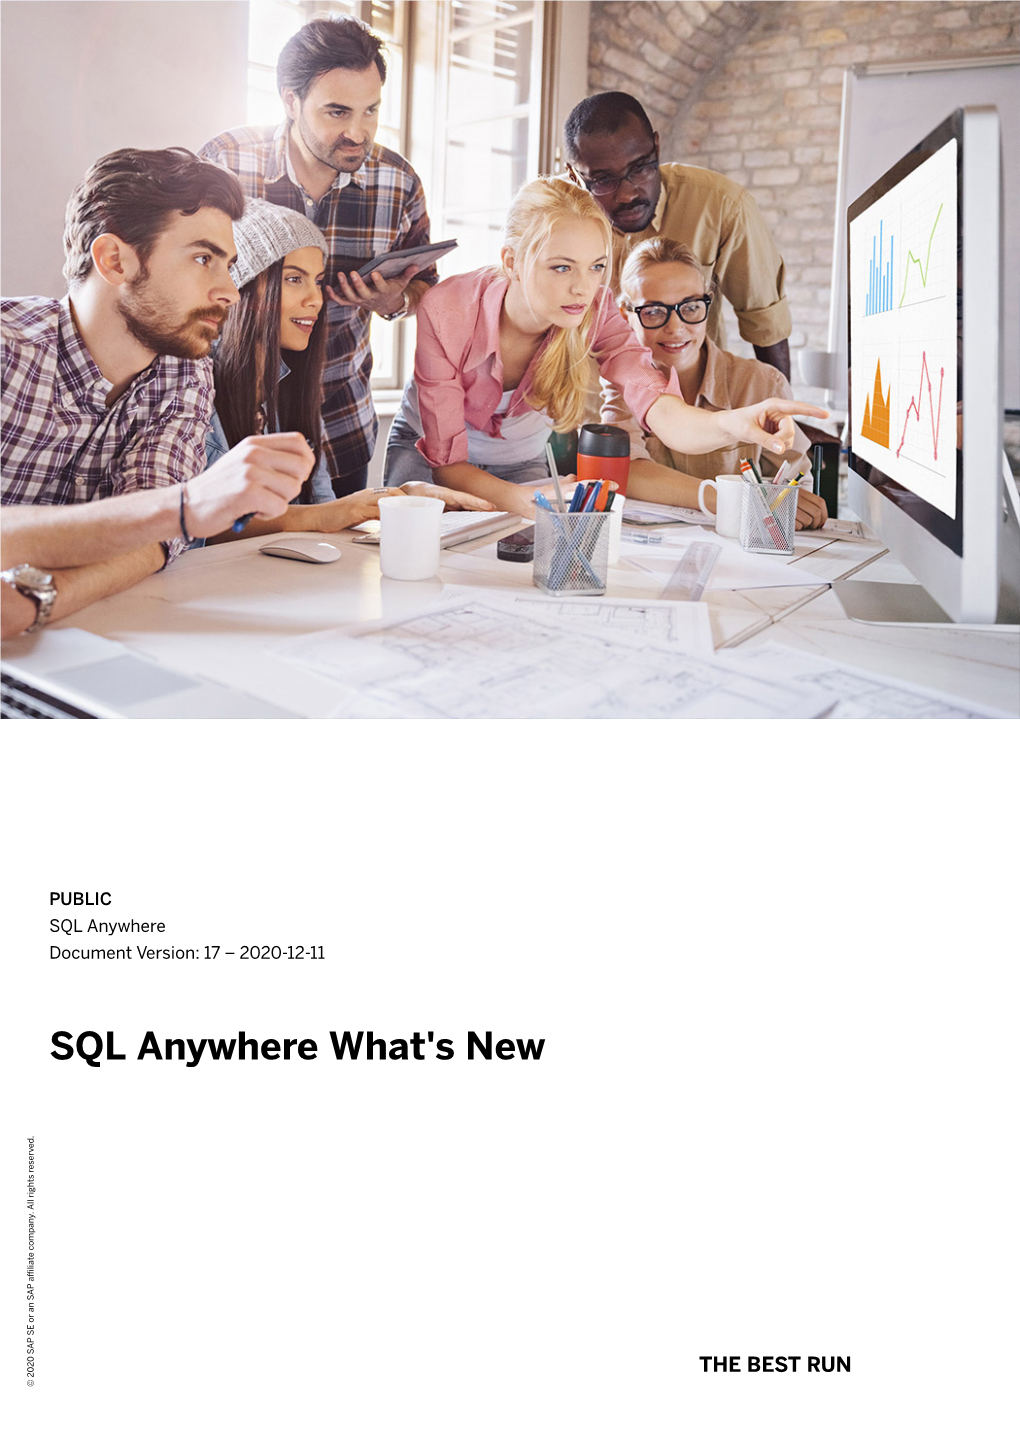 SQL Anywhere What's New Company